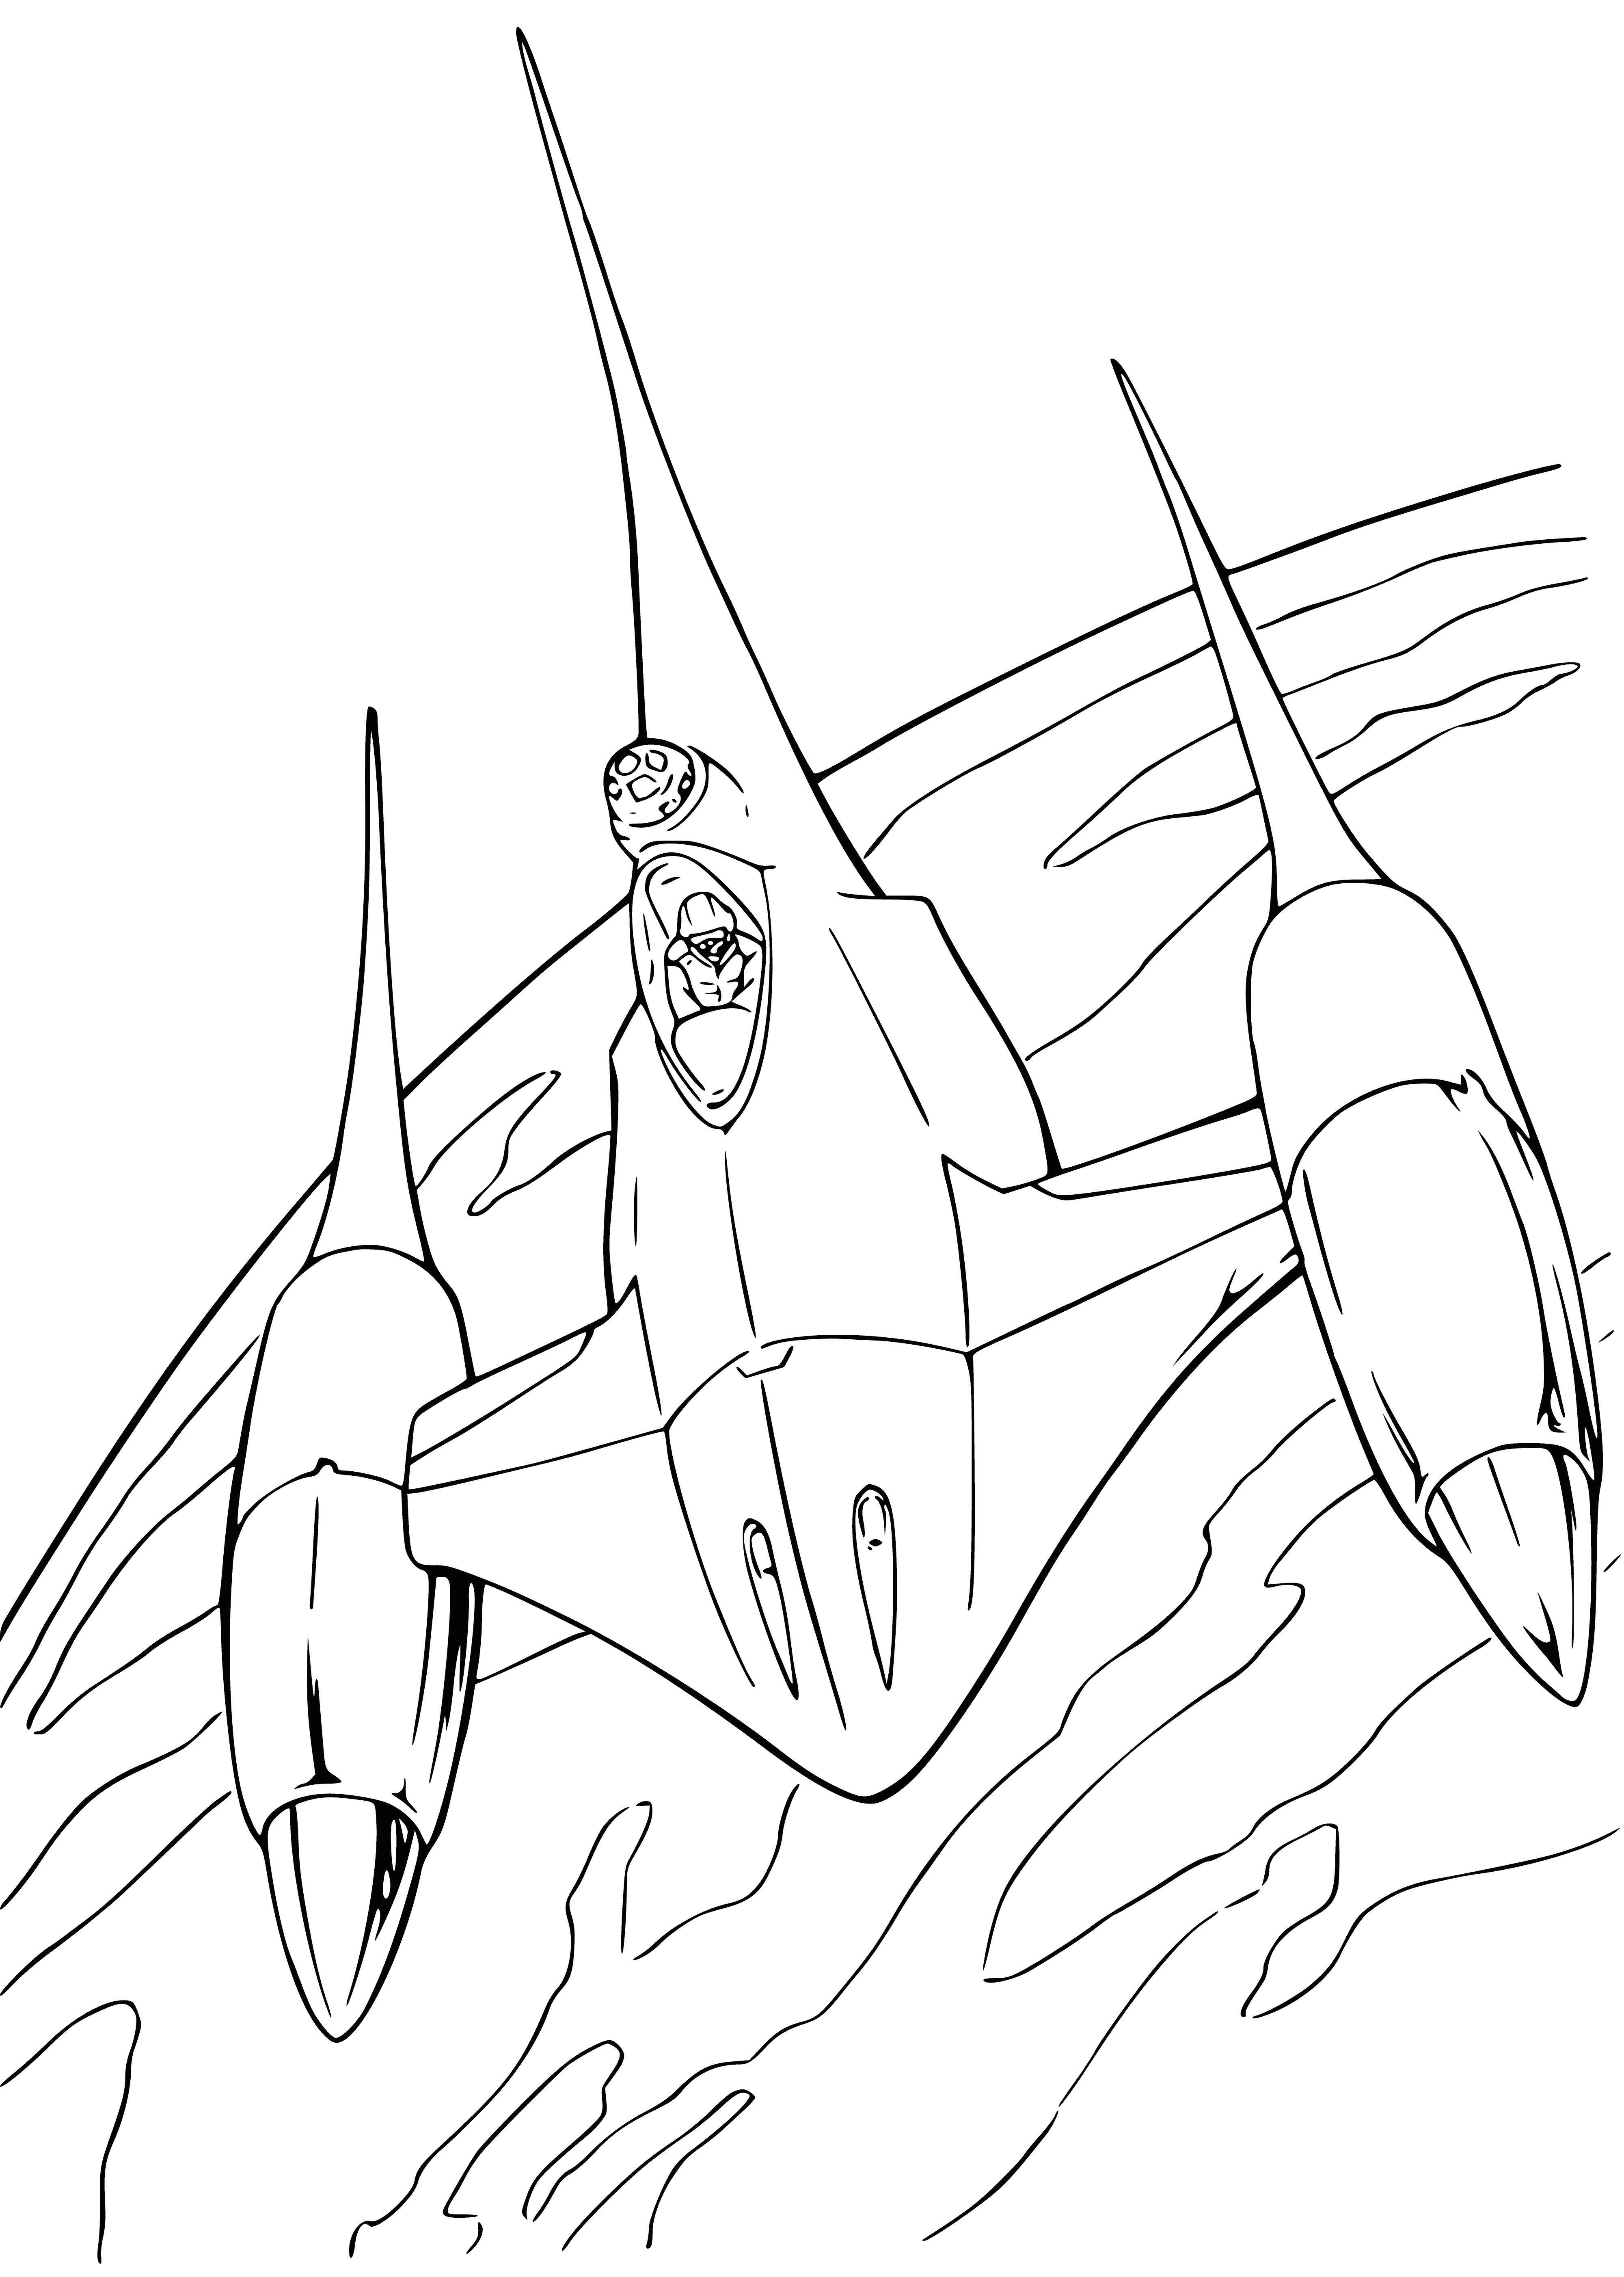 coloring page: A large silver spaceship zooms through a dark starry sky; pointy panels, four engines & small round windows adorn its surface.